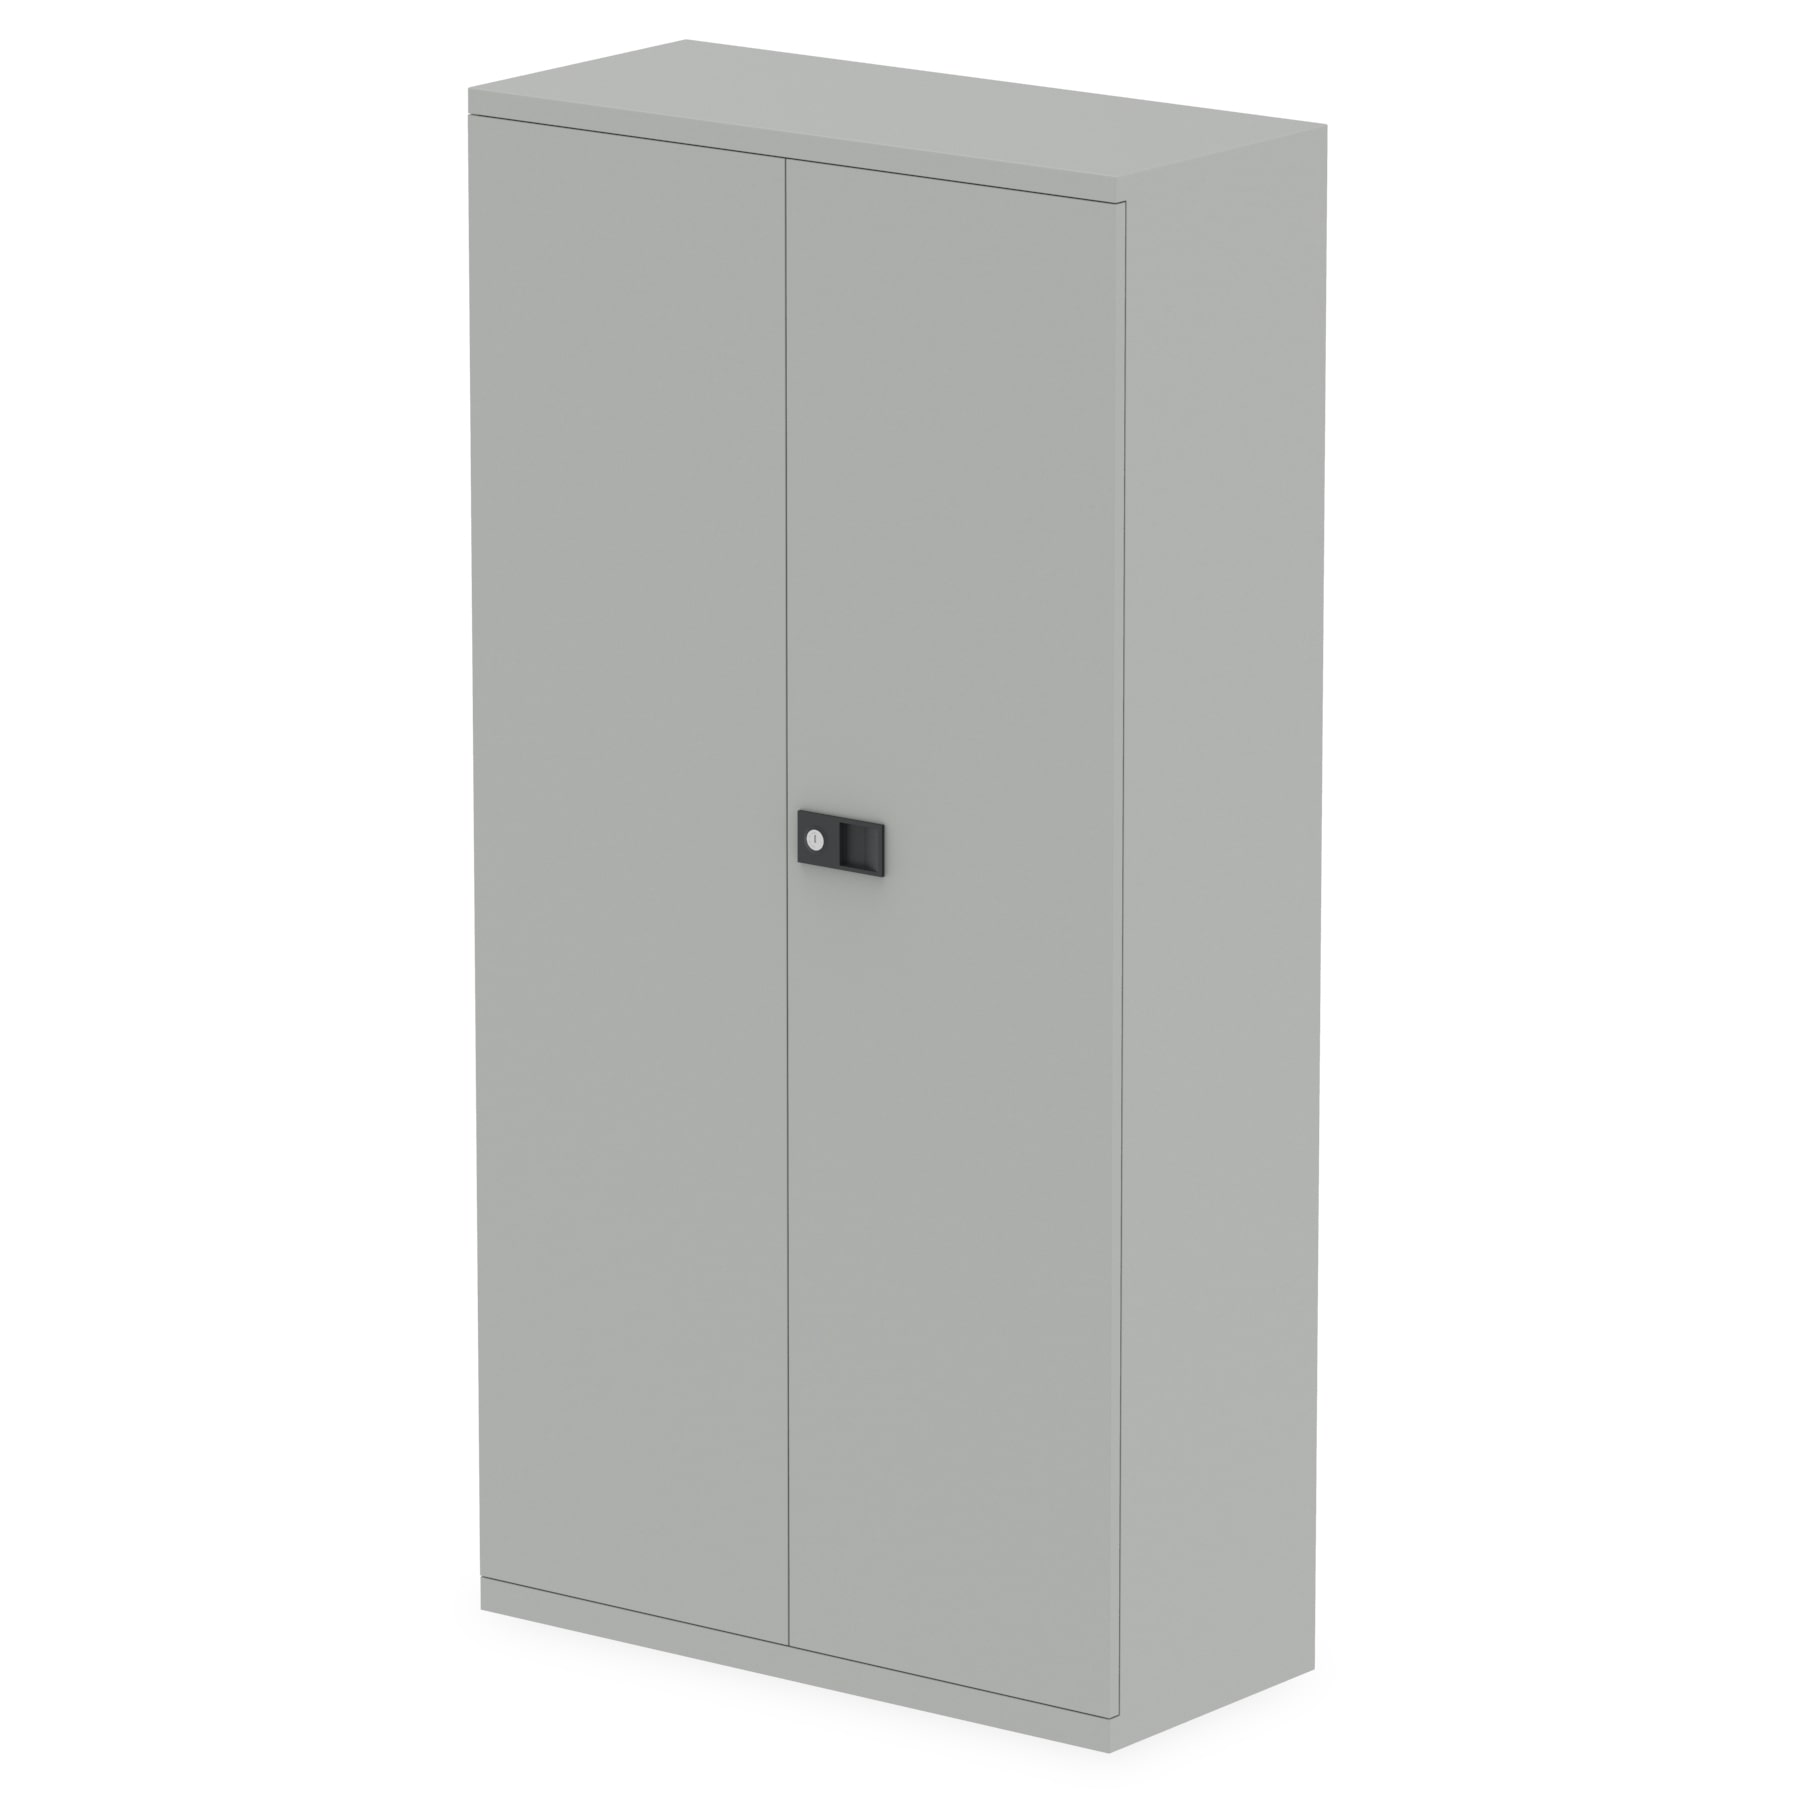 Qube by Bisley Stationery Cupboard (Available in 2 Sizes)